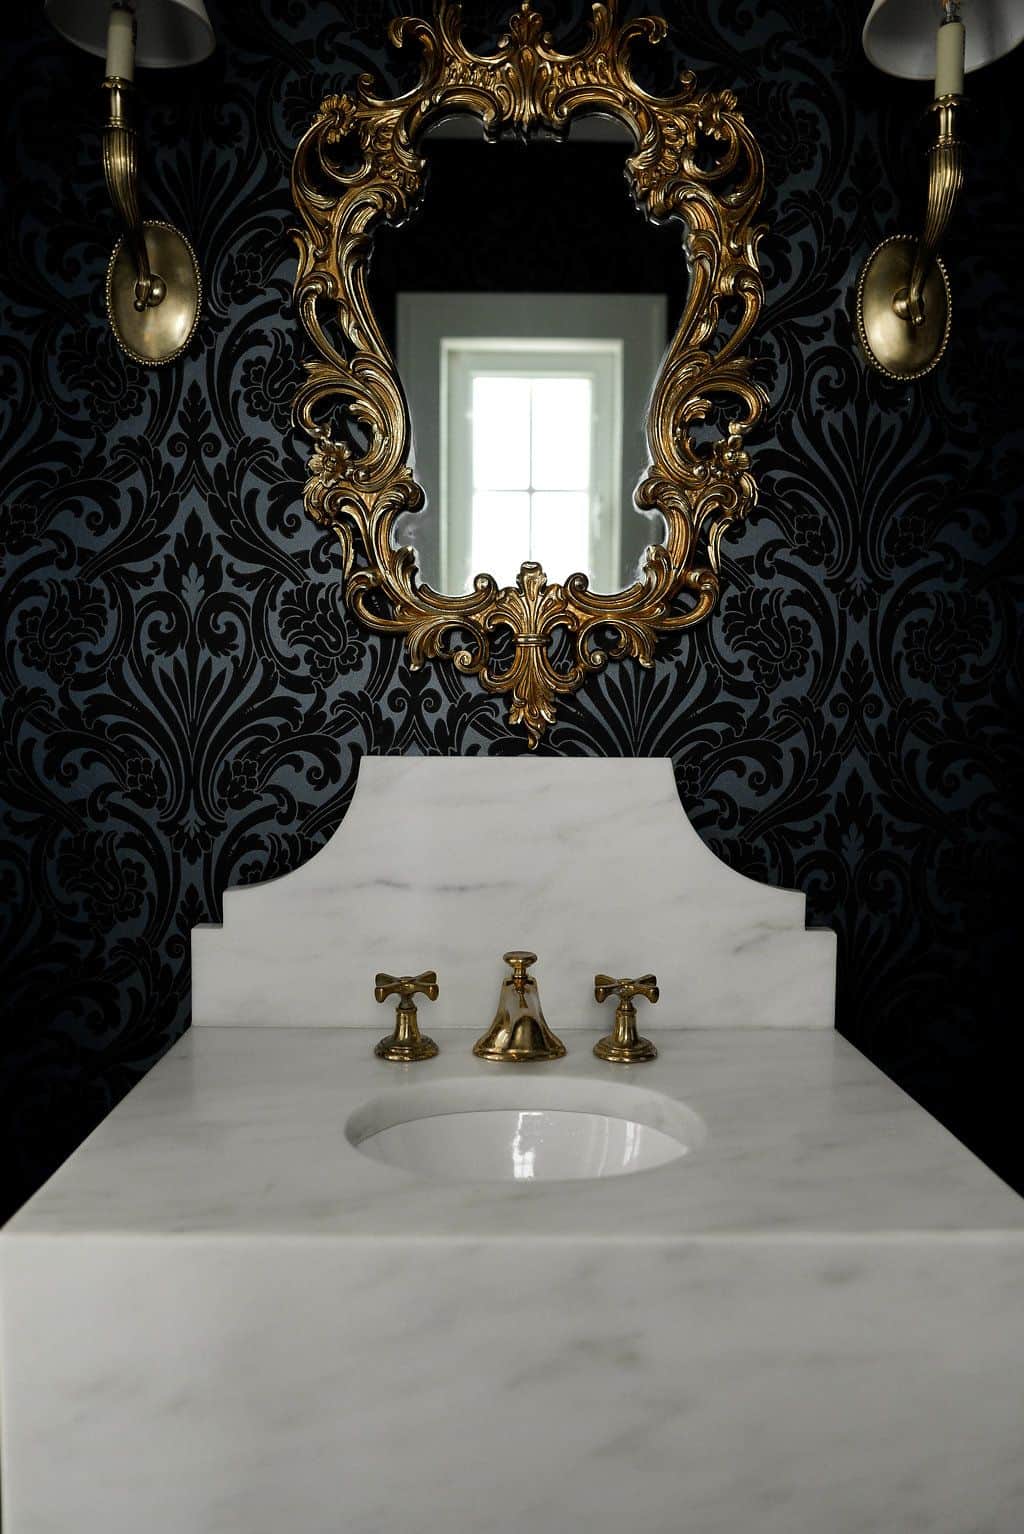 Beautiful Bathroom Trends To Follow This Year